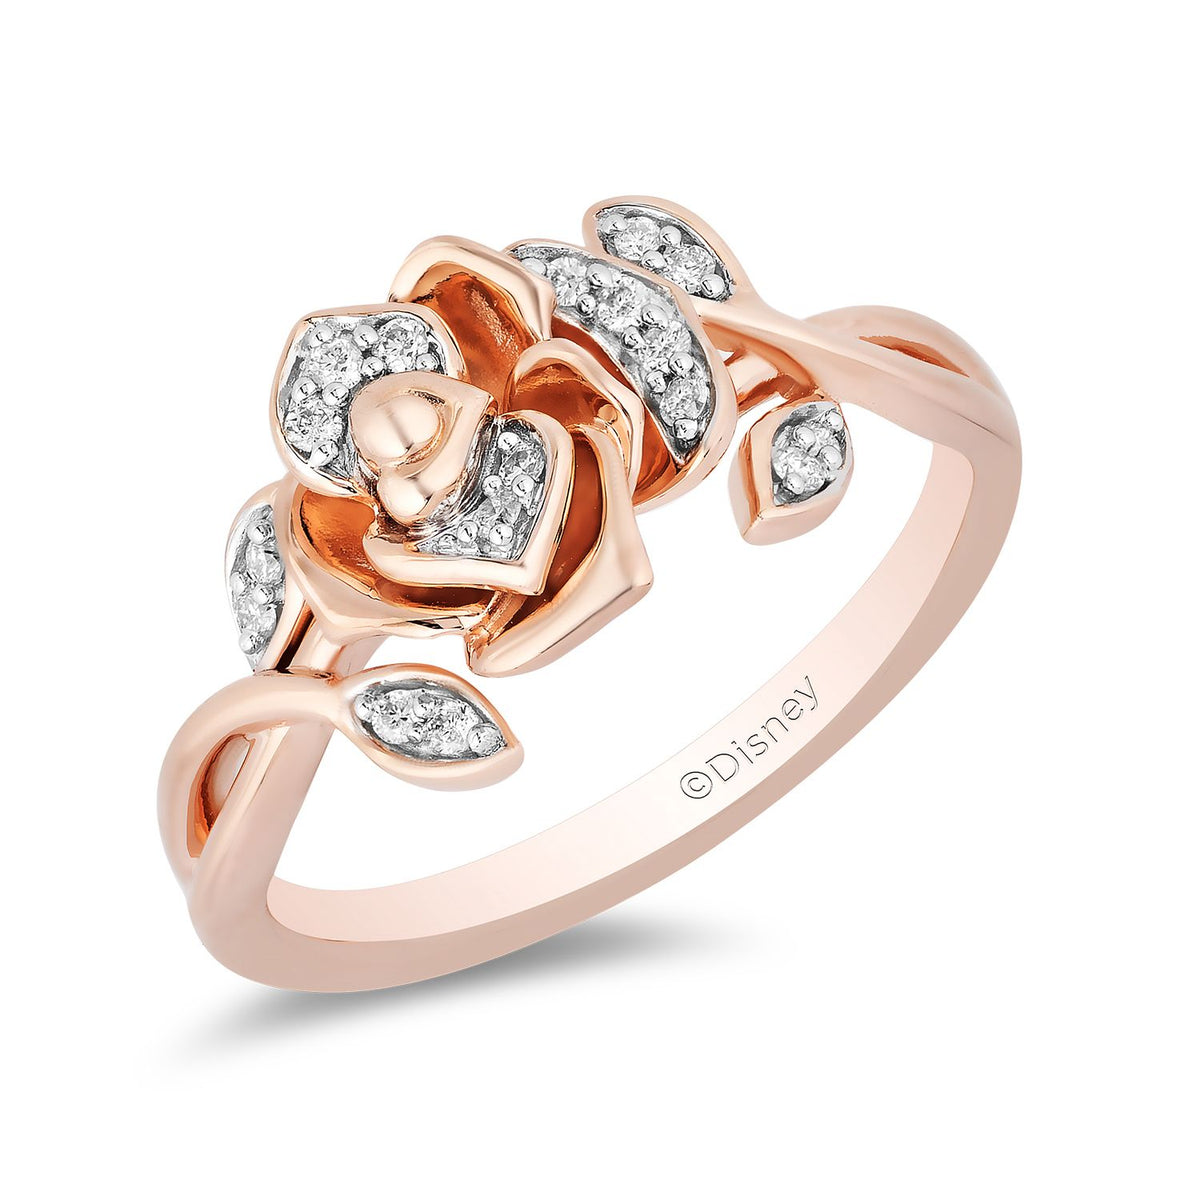 Double Row Ring in Rose Gold with Diamonds